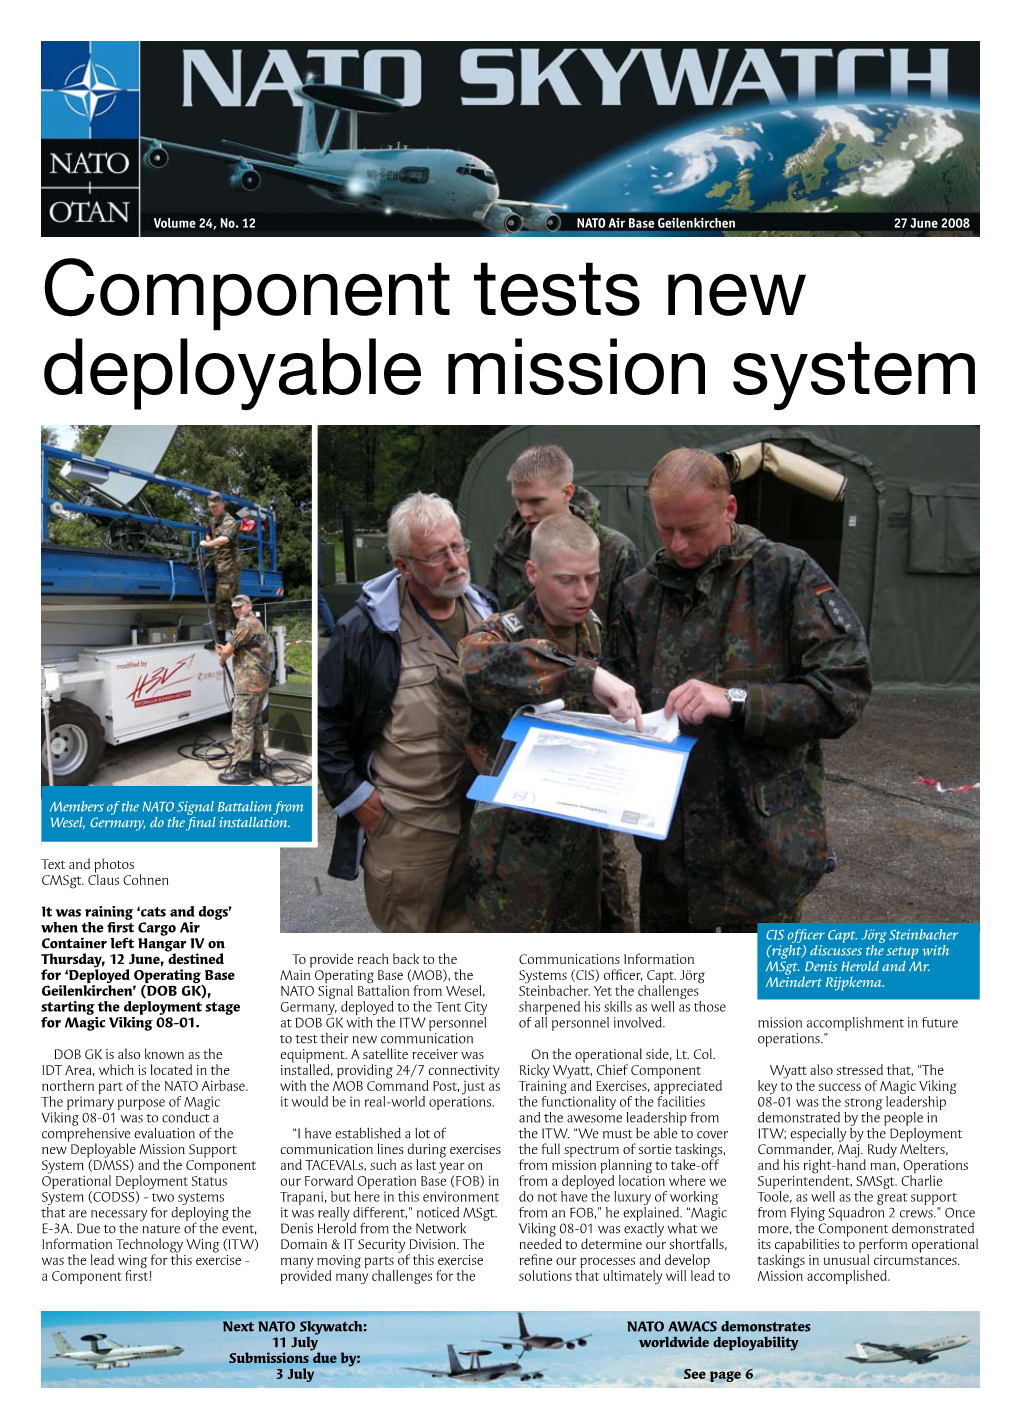 Component Tests New Deployable Mission System